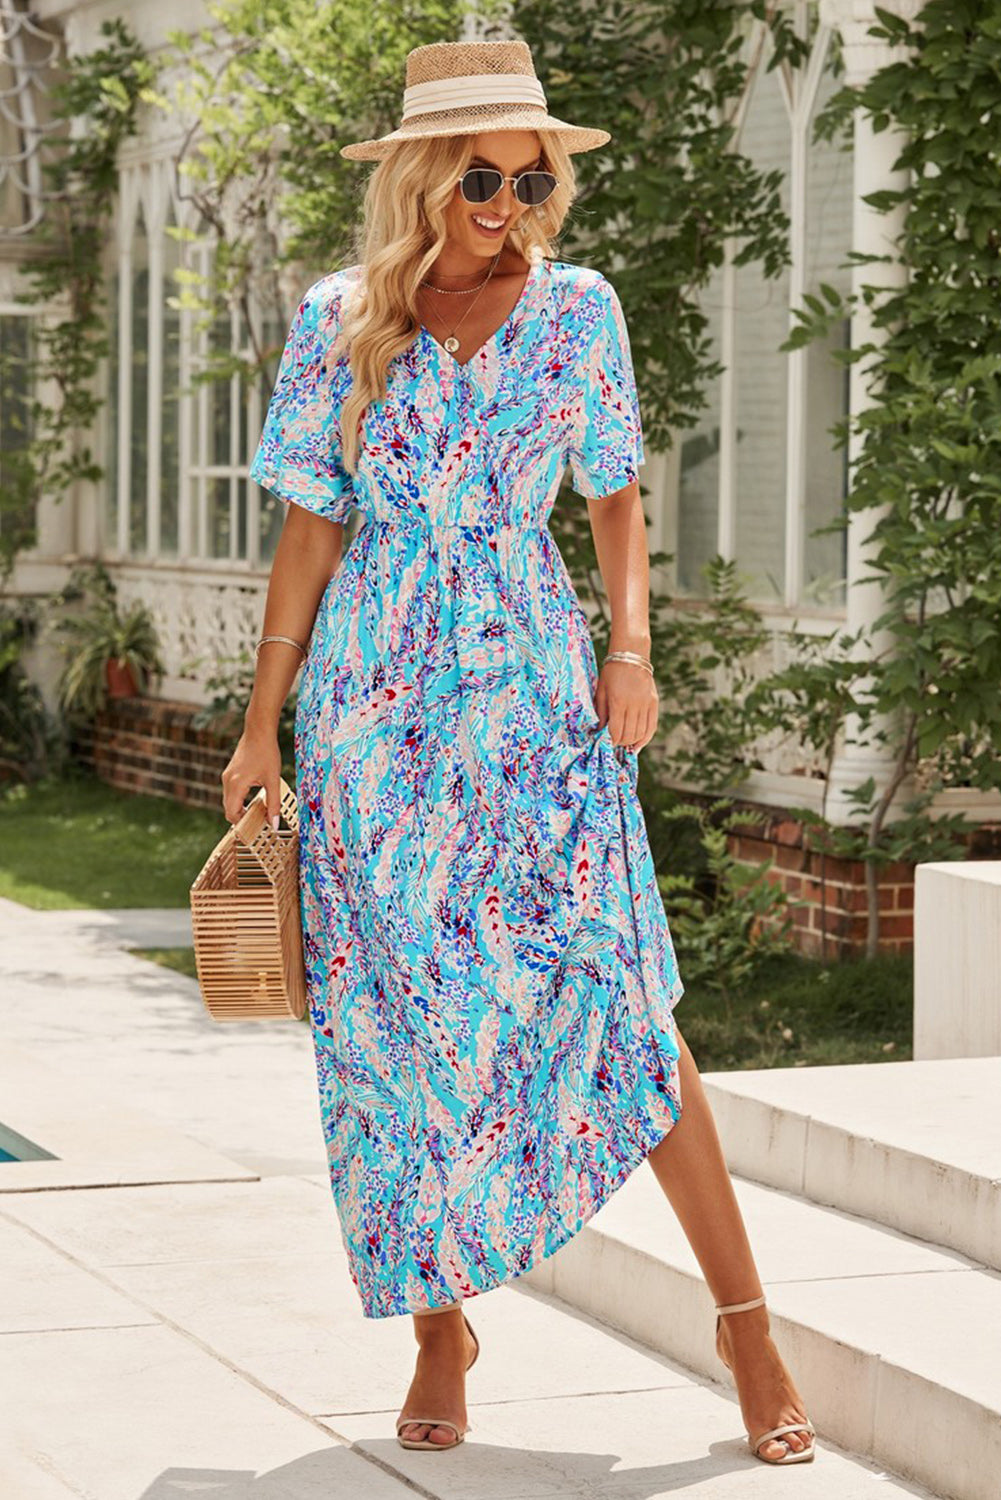 Multicolored V-Neck Maxi Dress - Online Only